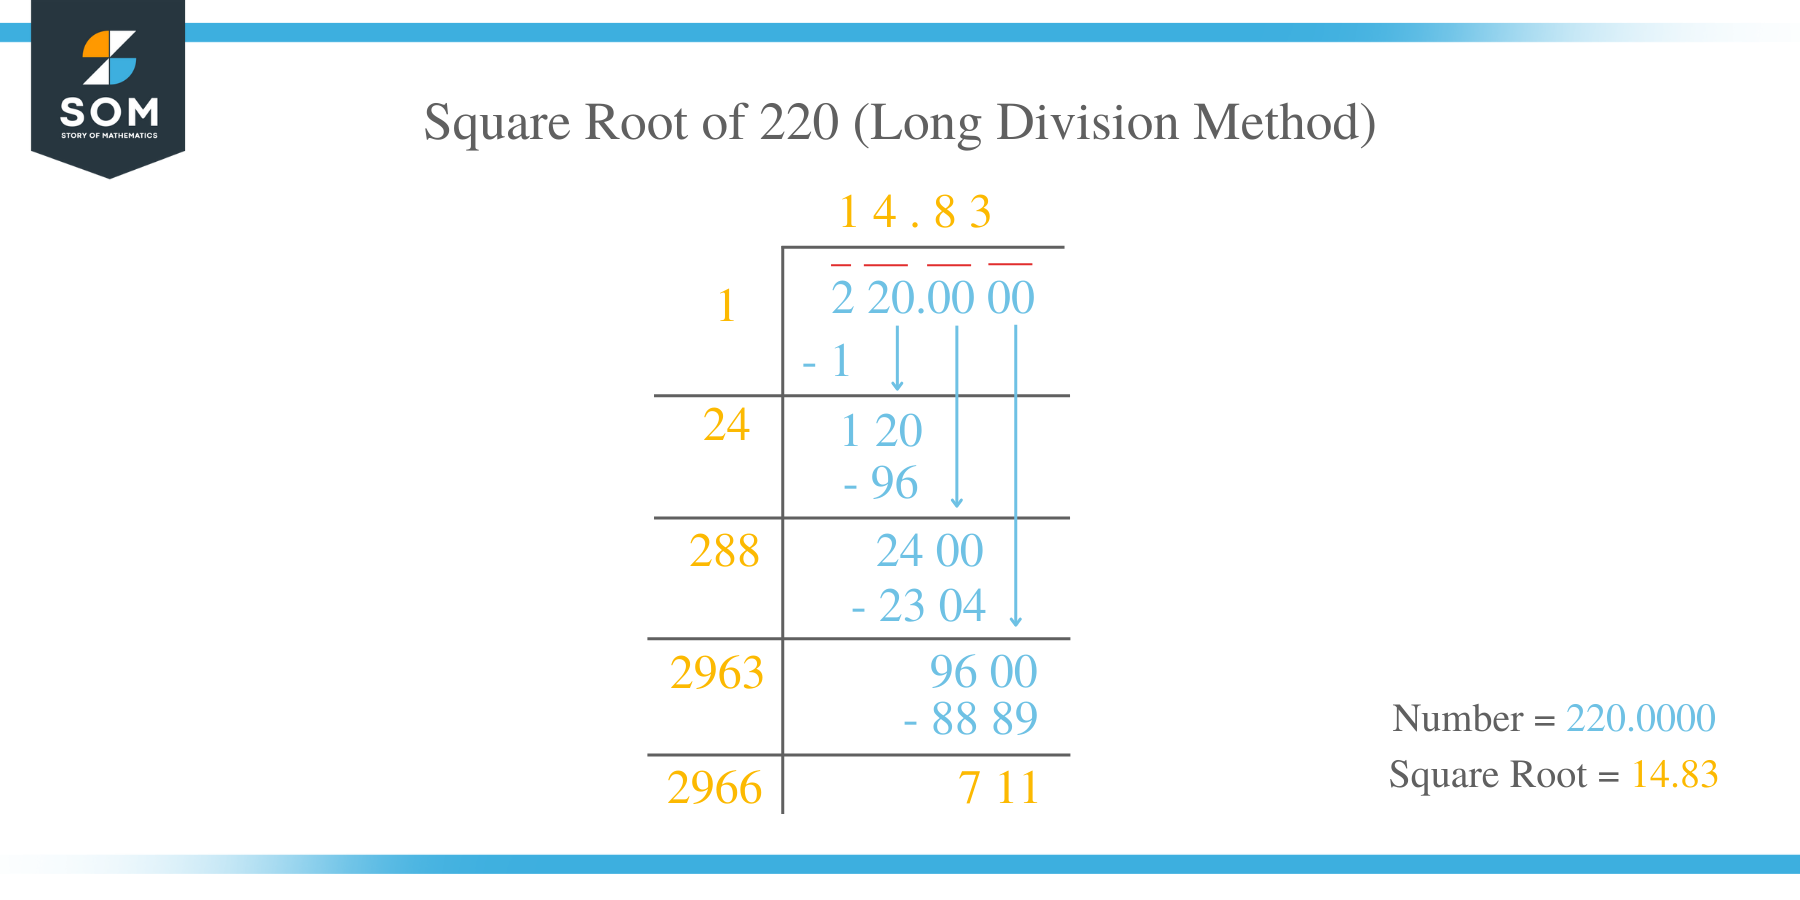 Square Root of 220 by Long Division Method